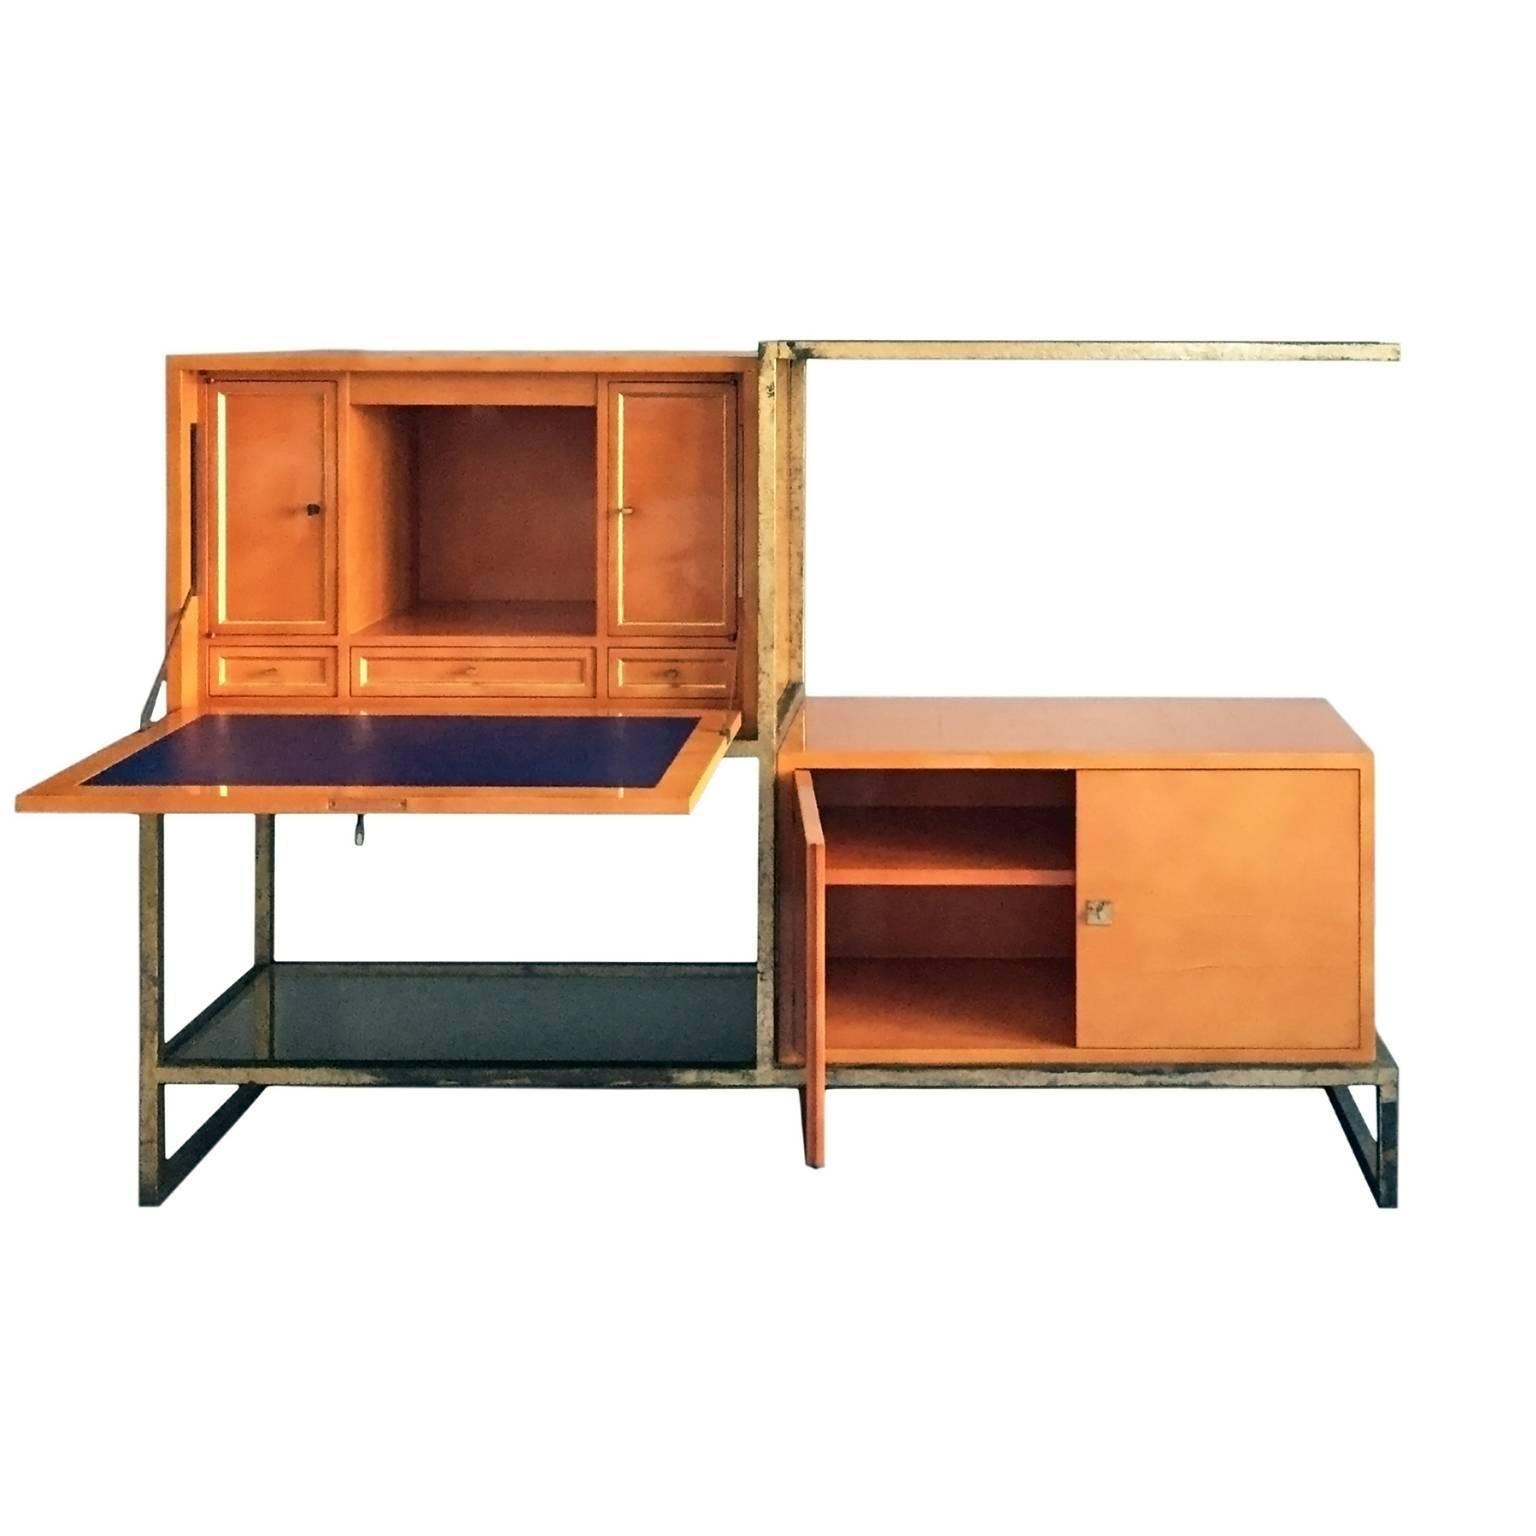 Exceptional lacquer and gilt iron secretary cabinet by Roger and Robert Thibier.

Executed in the 1960's as a custom commission, this exceptional piece features two orange lacquered cabinets housed in a gilt iron metal structure with two glass